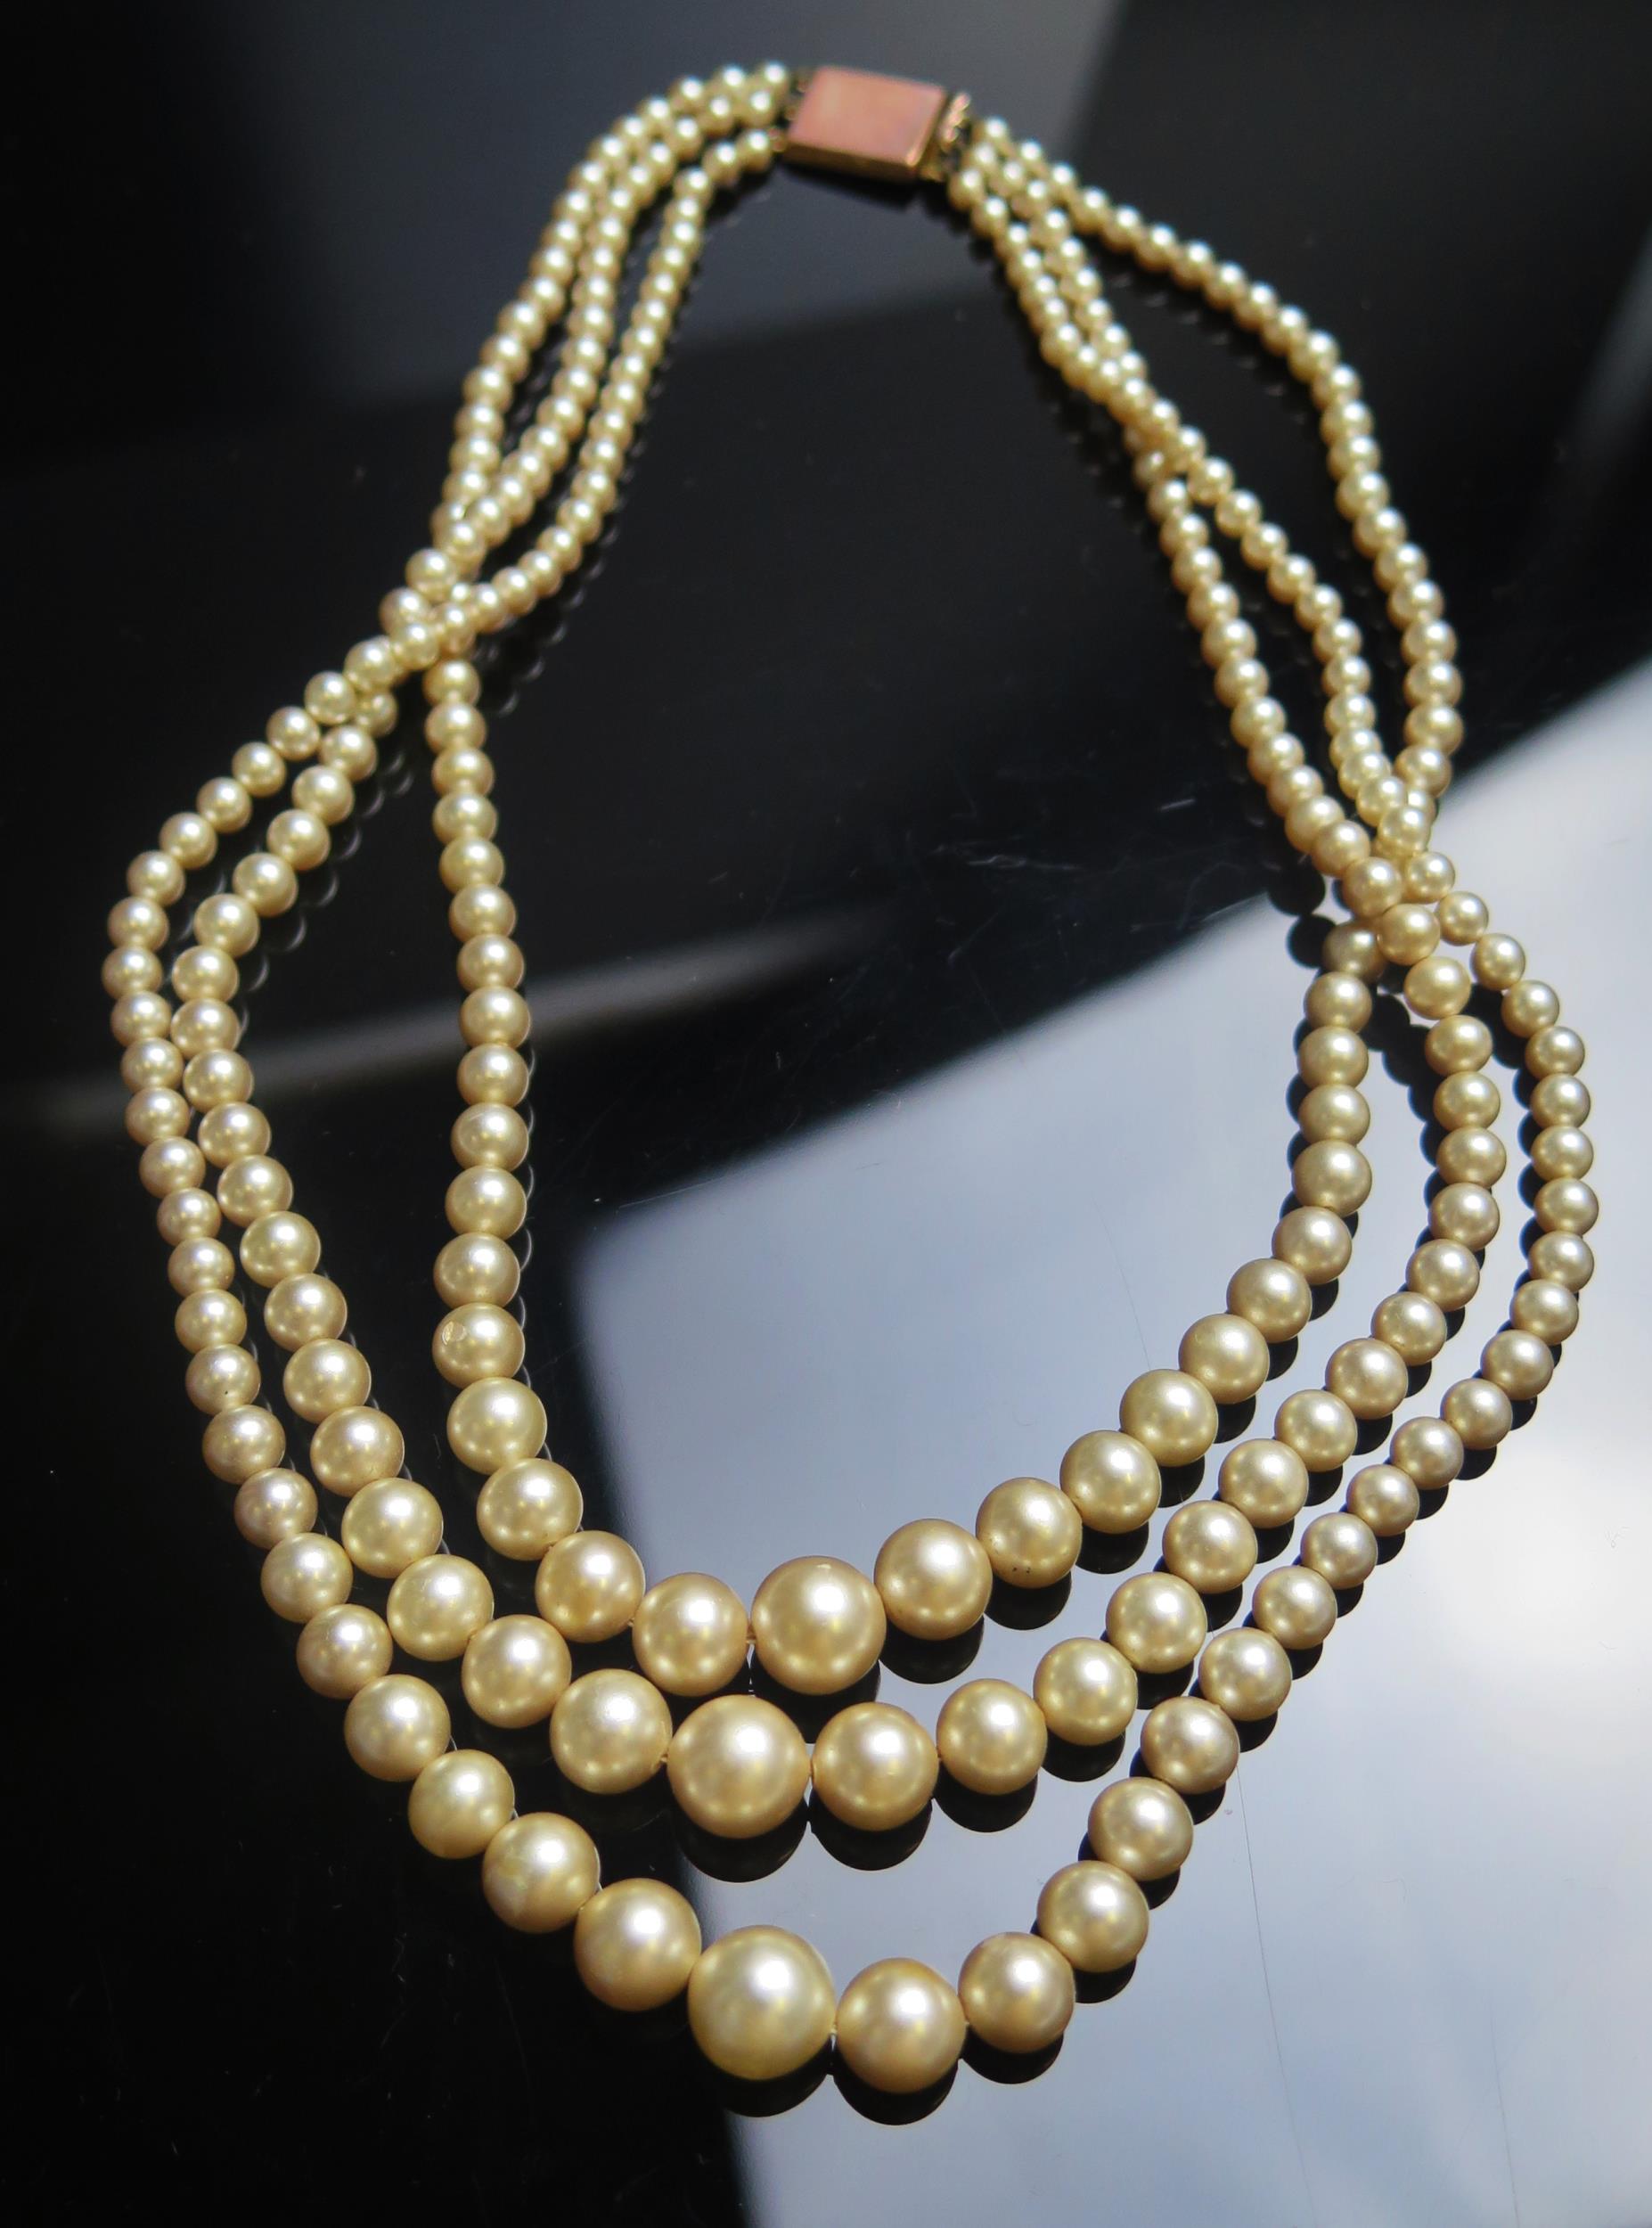 A CIRO Three Strand Synthetic Pearl Necklace with 9ct gold clasp, 14.5" (37cm)